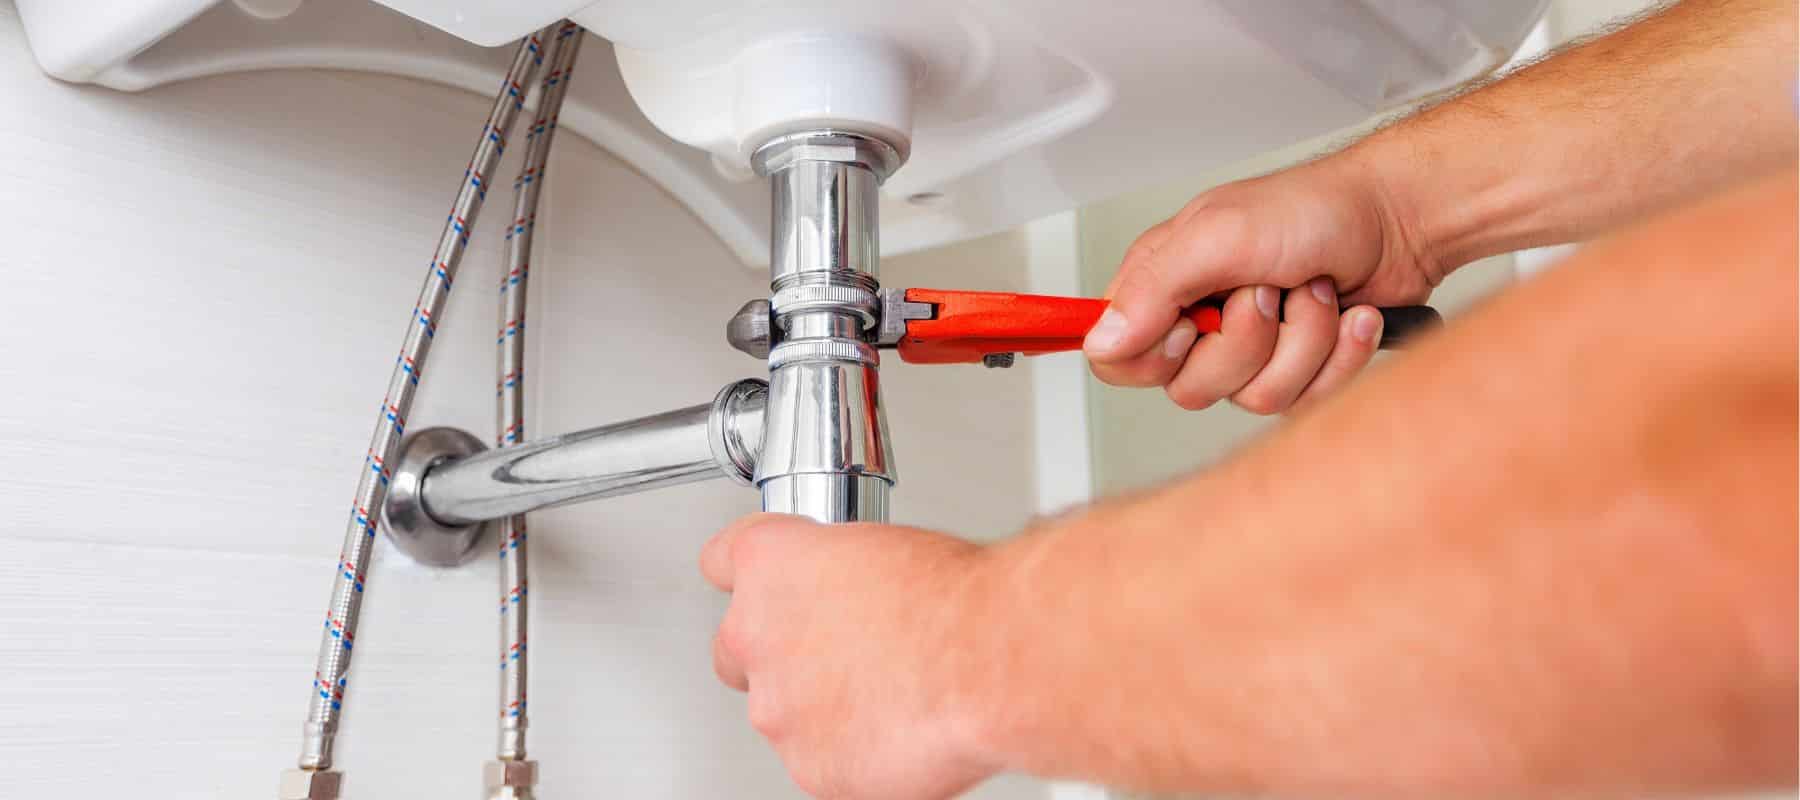 plumber using a wrench to tighten a pipe